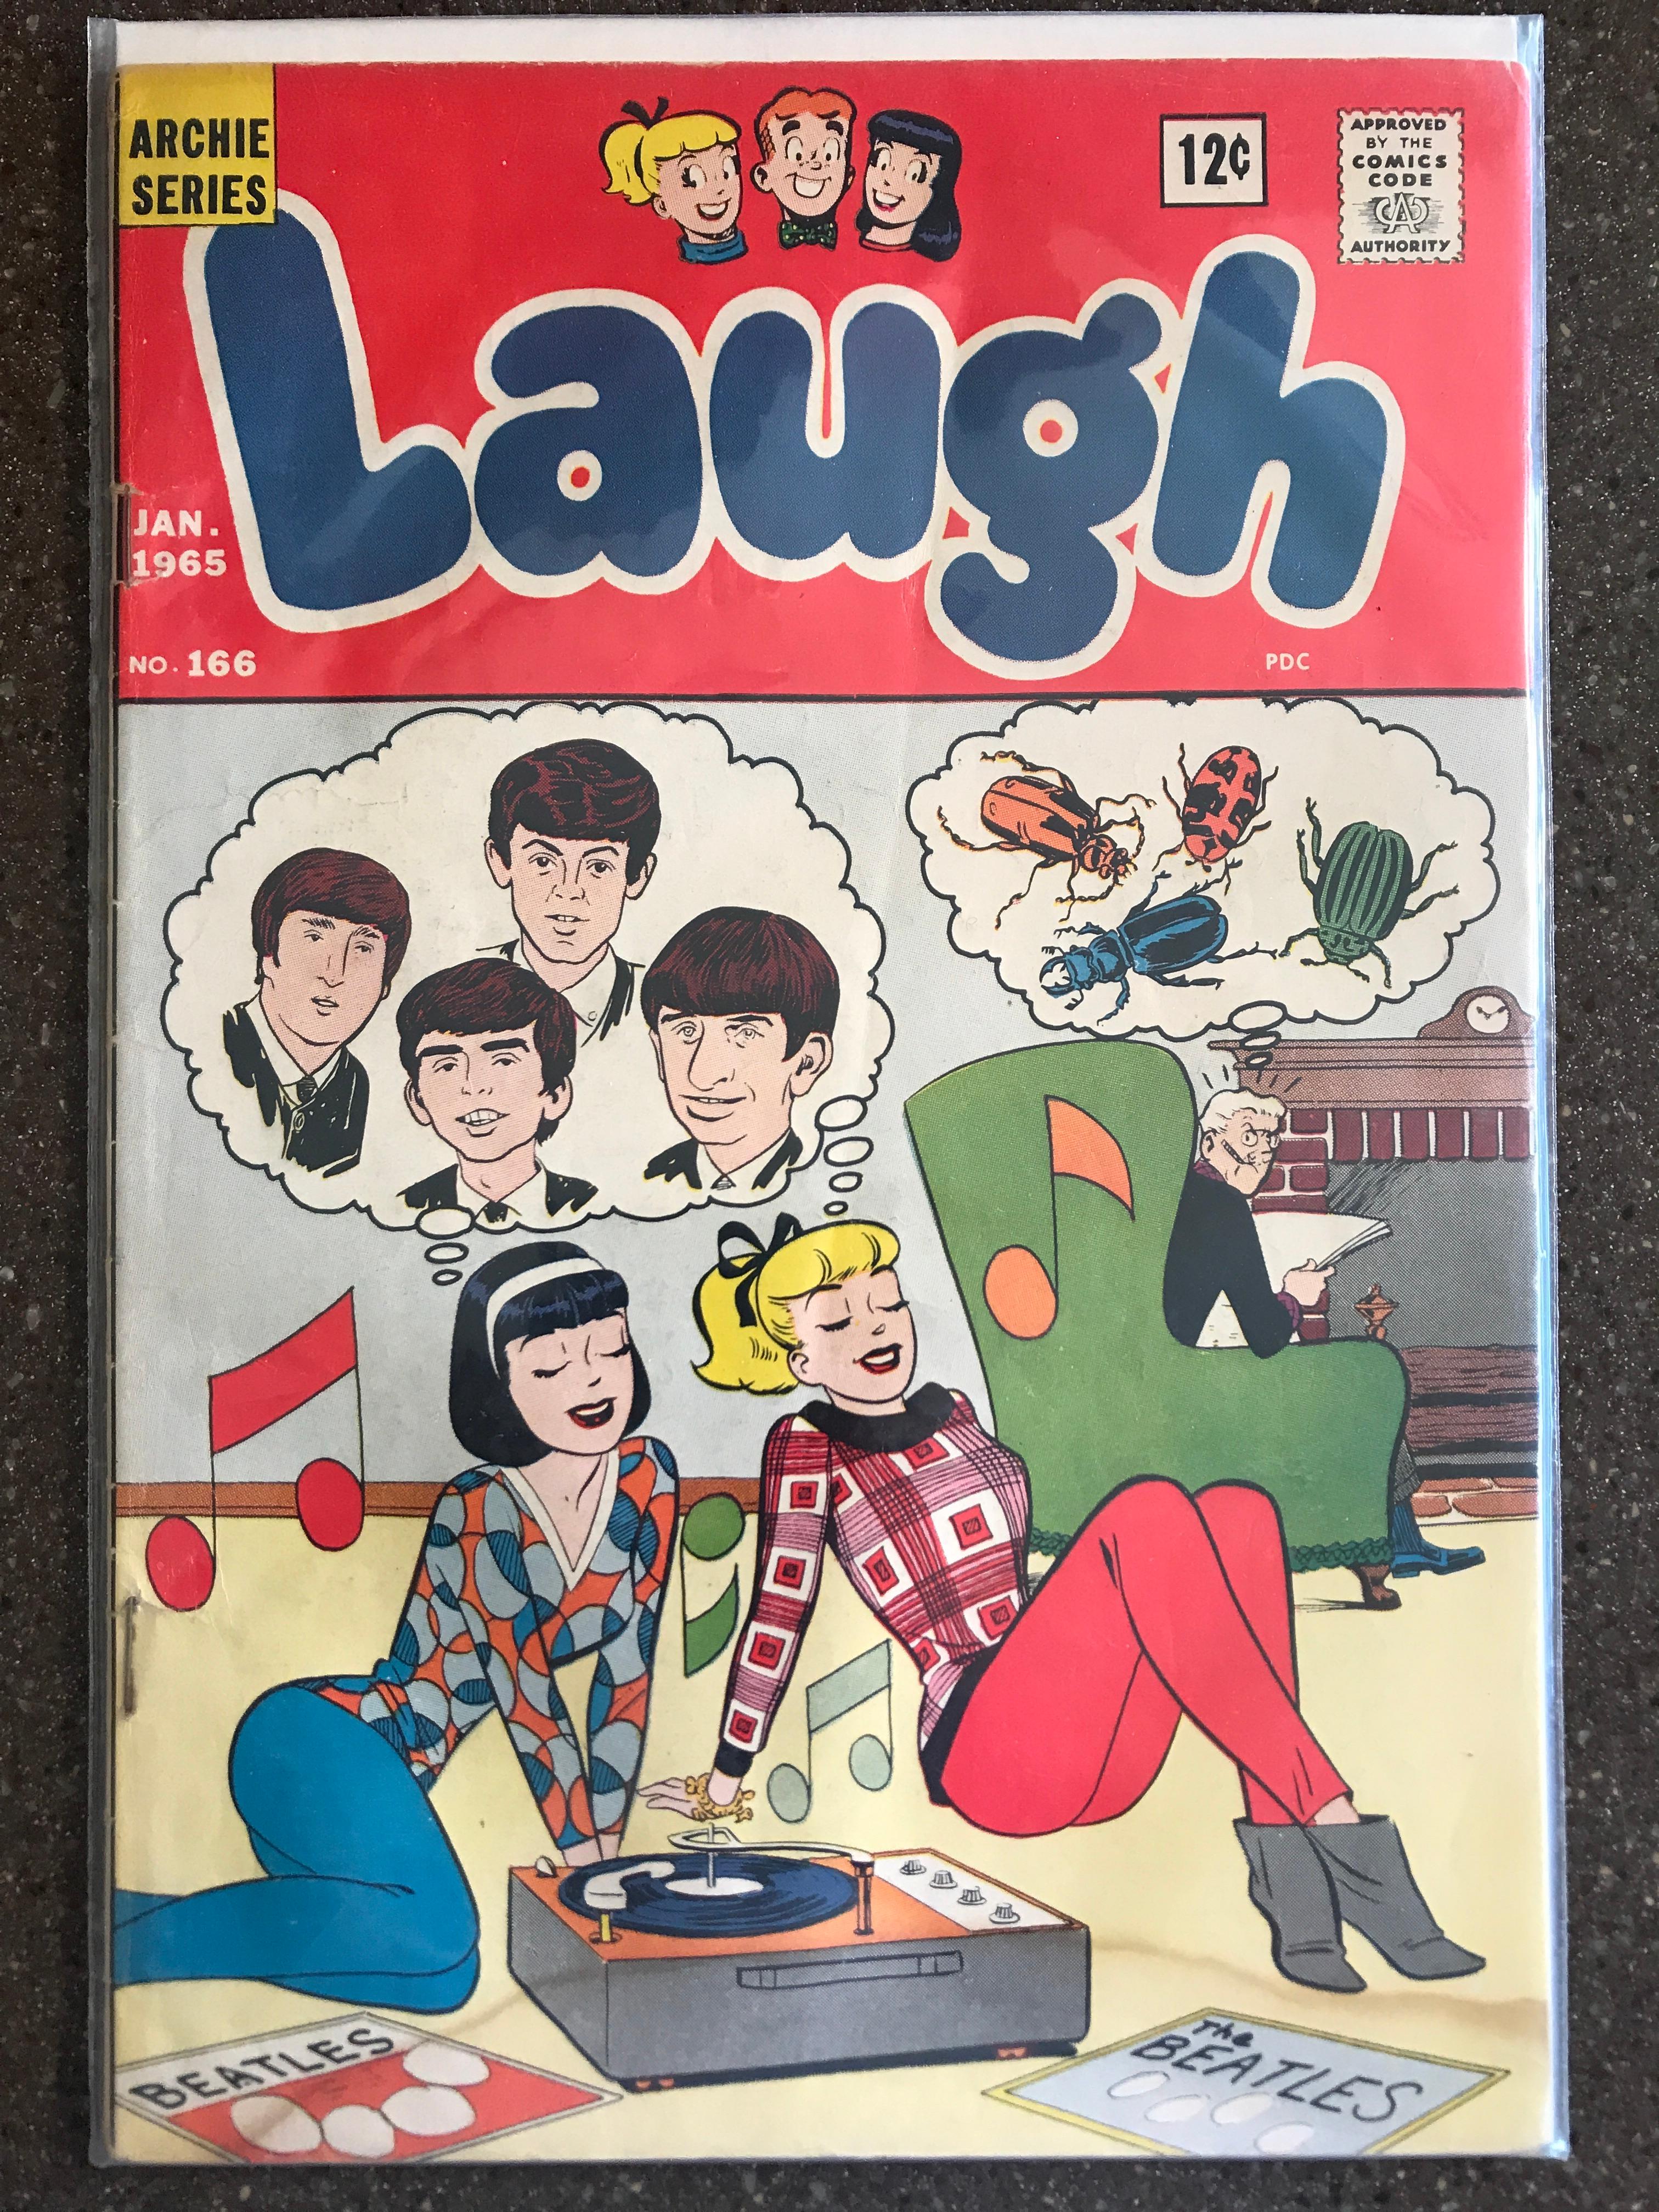 Laugh Comic #166 Archie Series 1965 Silver Age KEY BEATLES COVER